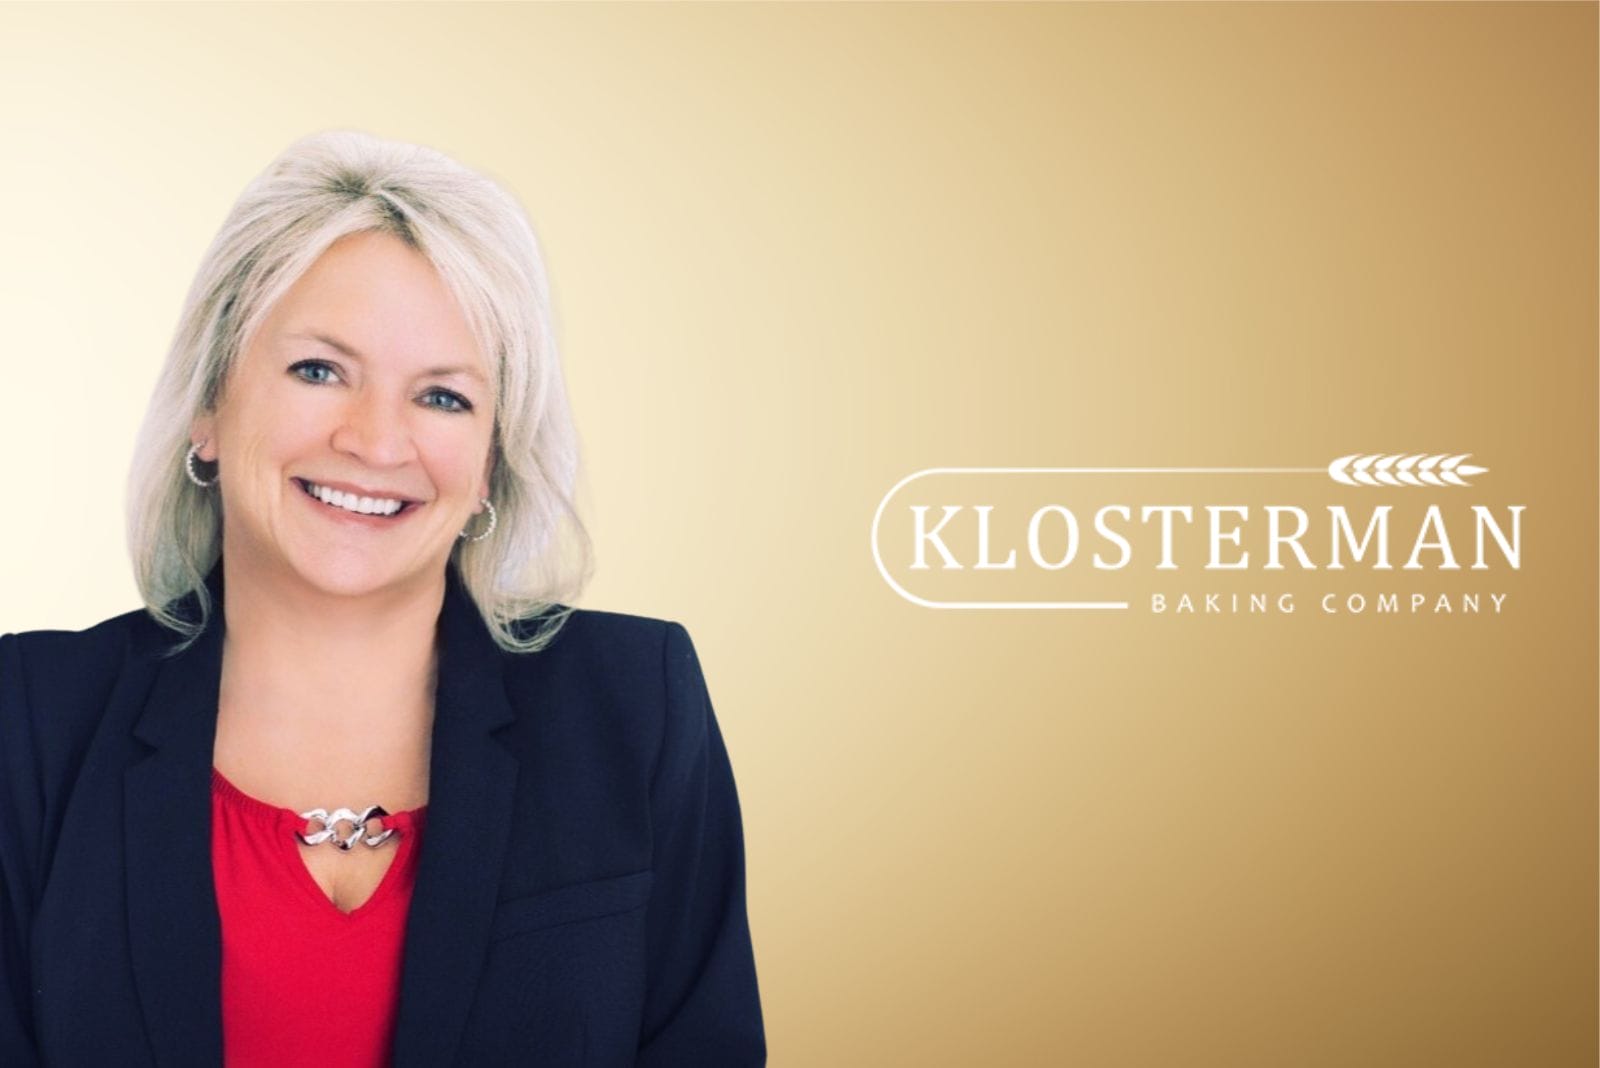 Blonde woman CFO in black blazer and red top next to Klosterman Baking Co. logo